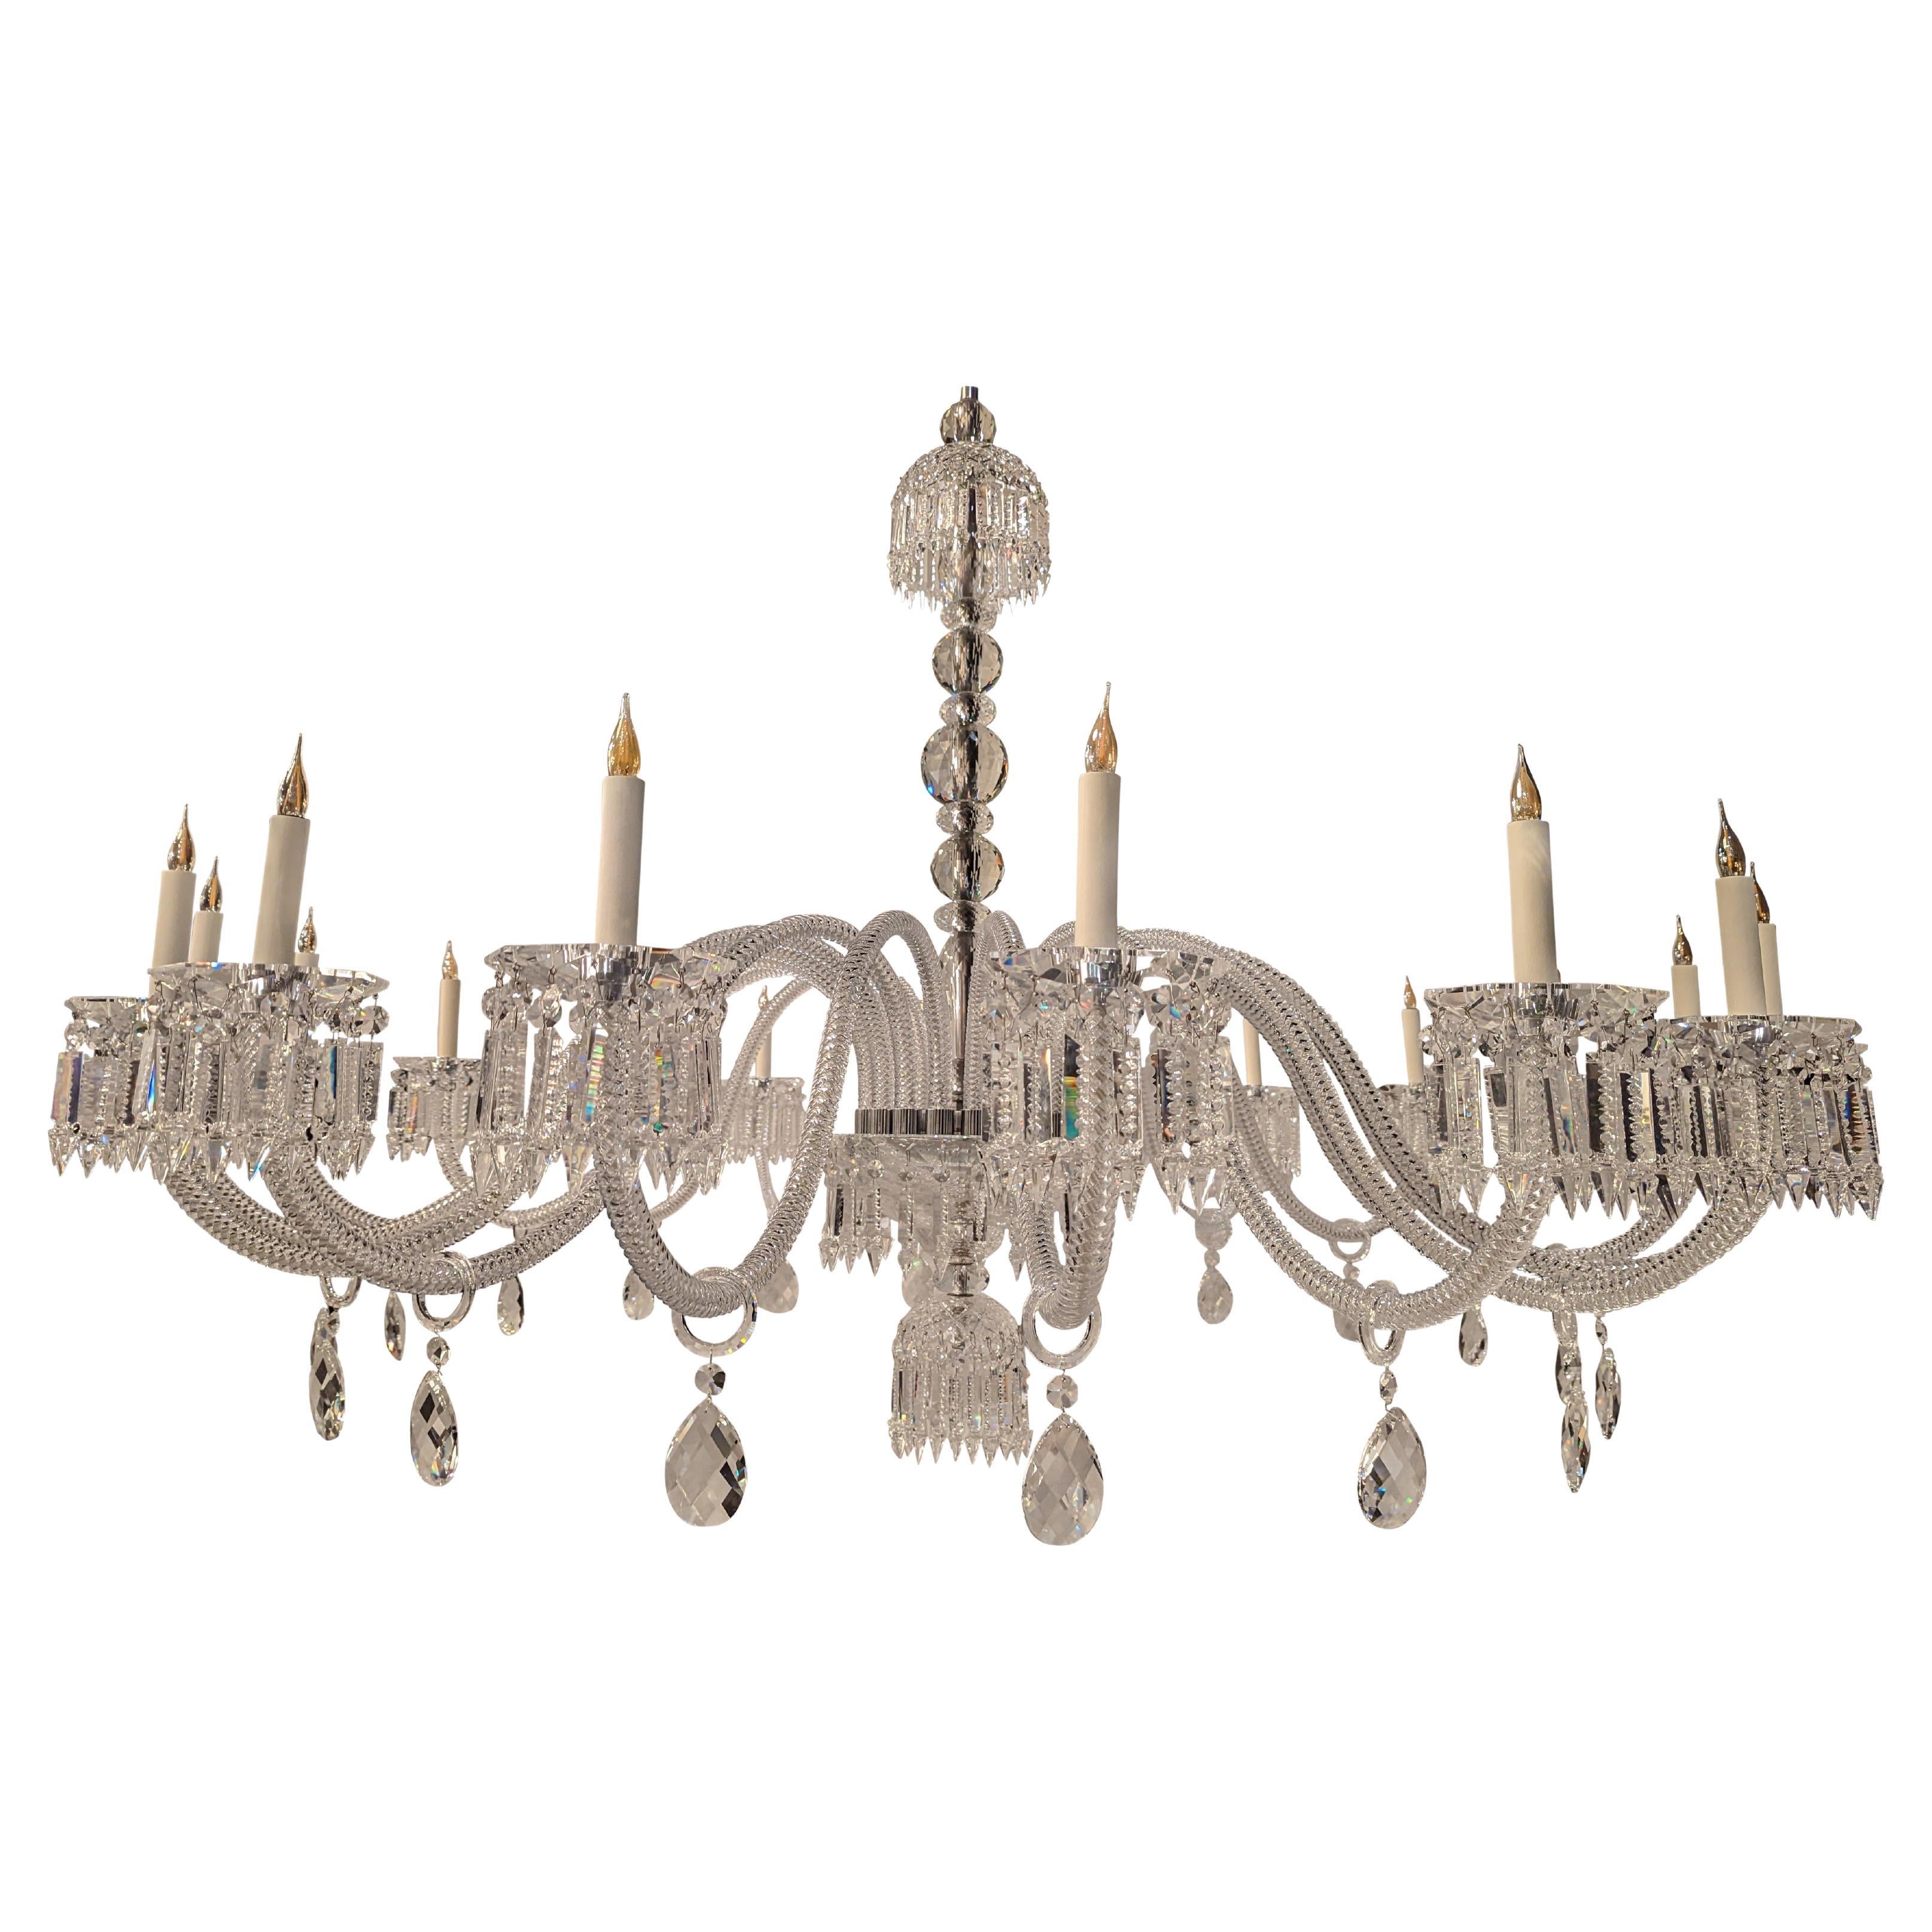 20th Crystal Chandelier of 18 lights with twisted arms Inspired of Baccarat For Sale